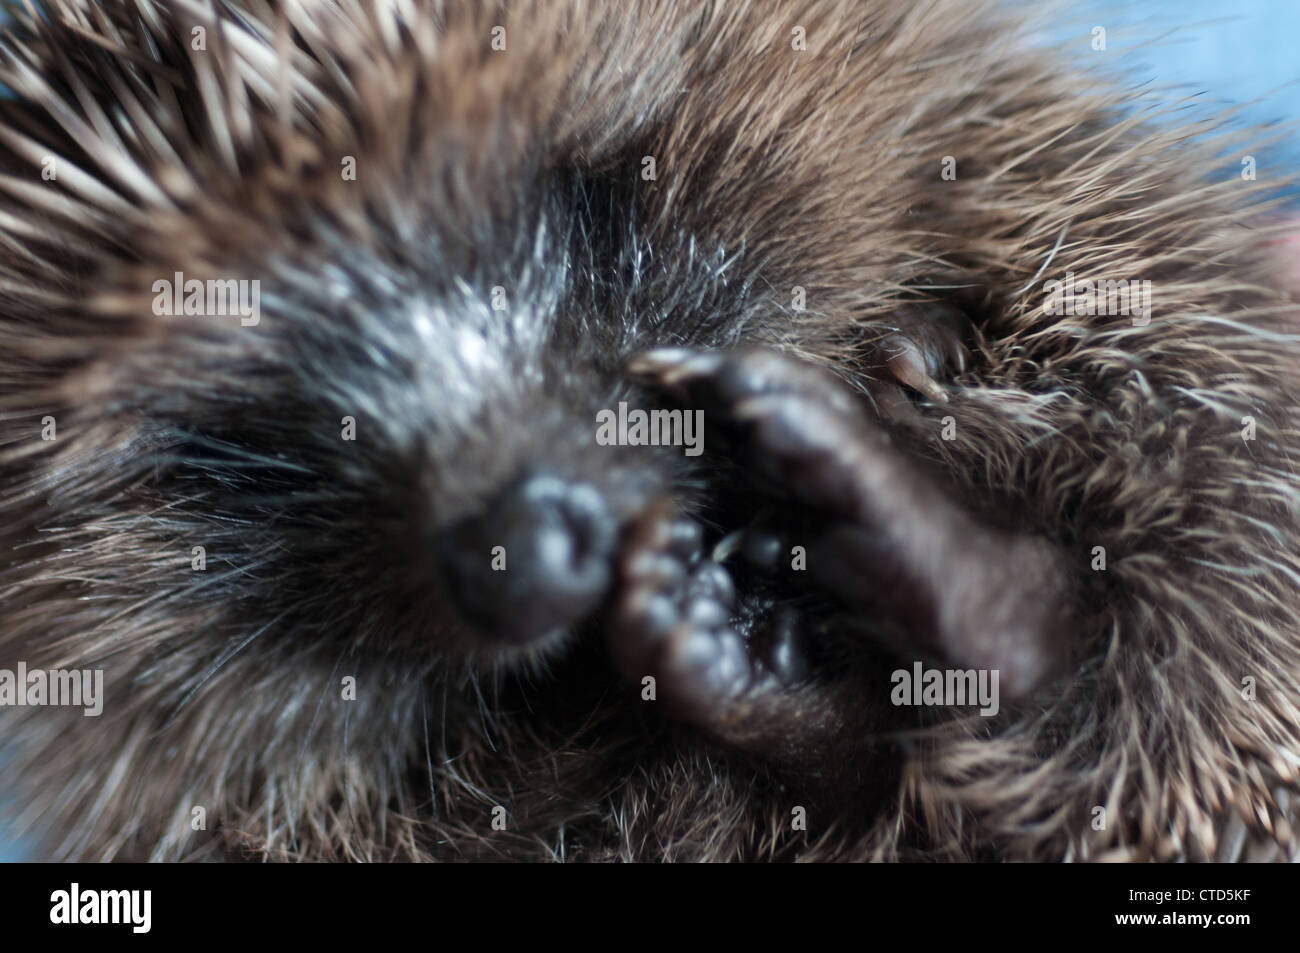 A hedgelet found on the road is taken care off Stock Photo